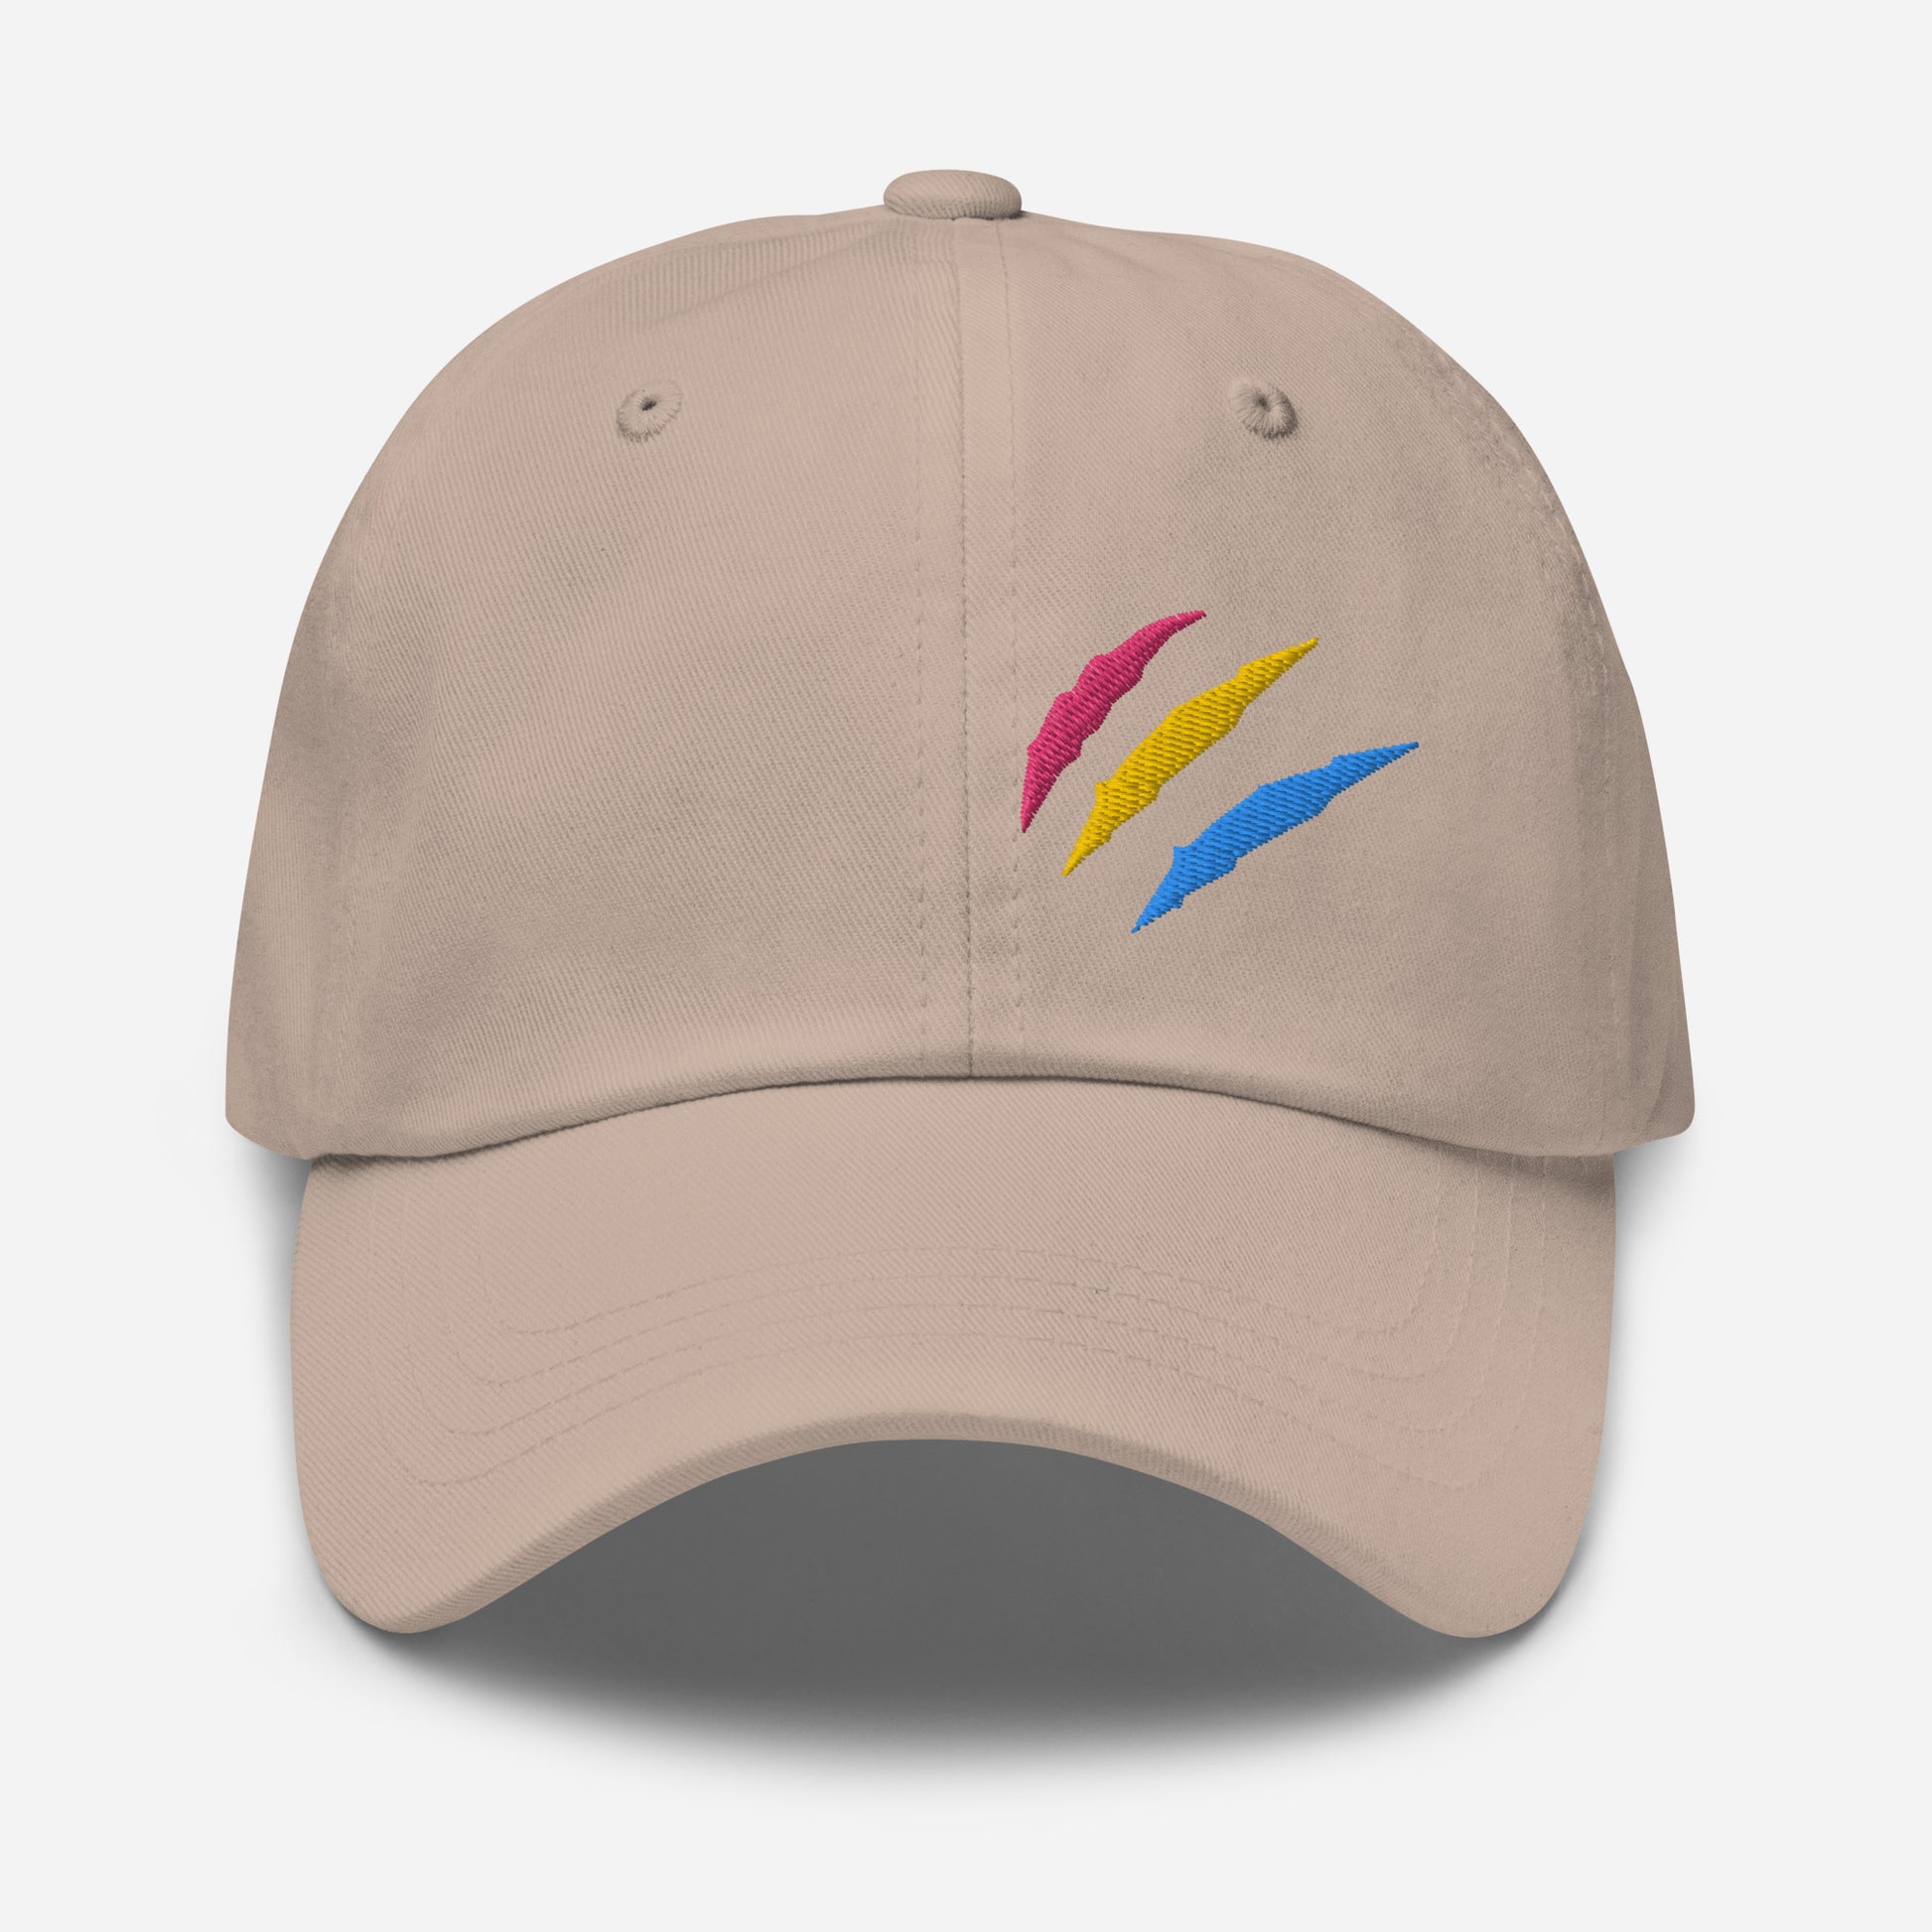 Stone baseball hat featuring pansexual pride scratch mark embroidery with a low profile, adjustable strap.